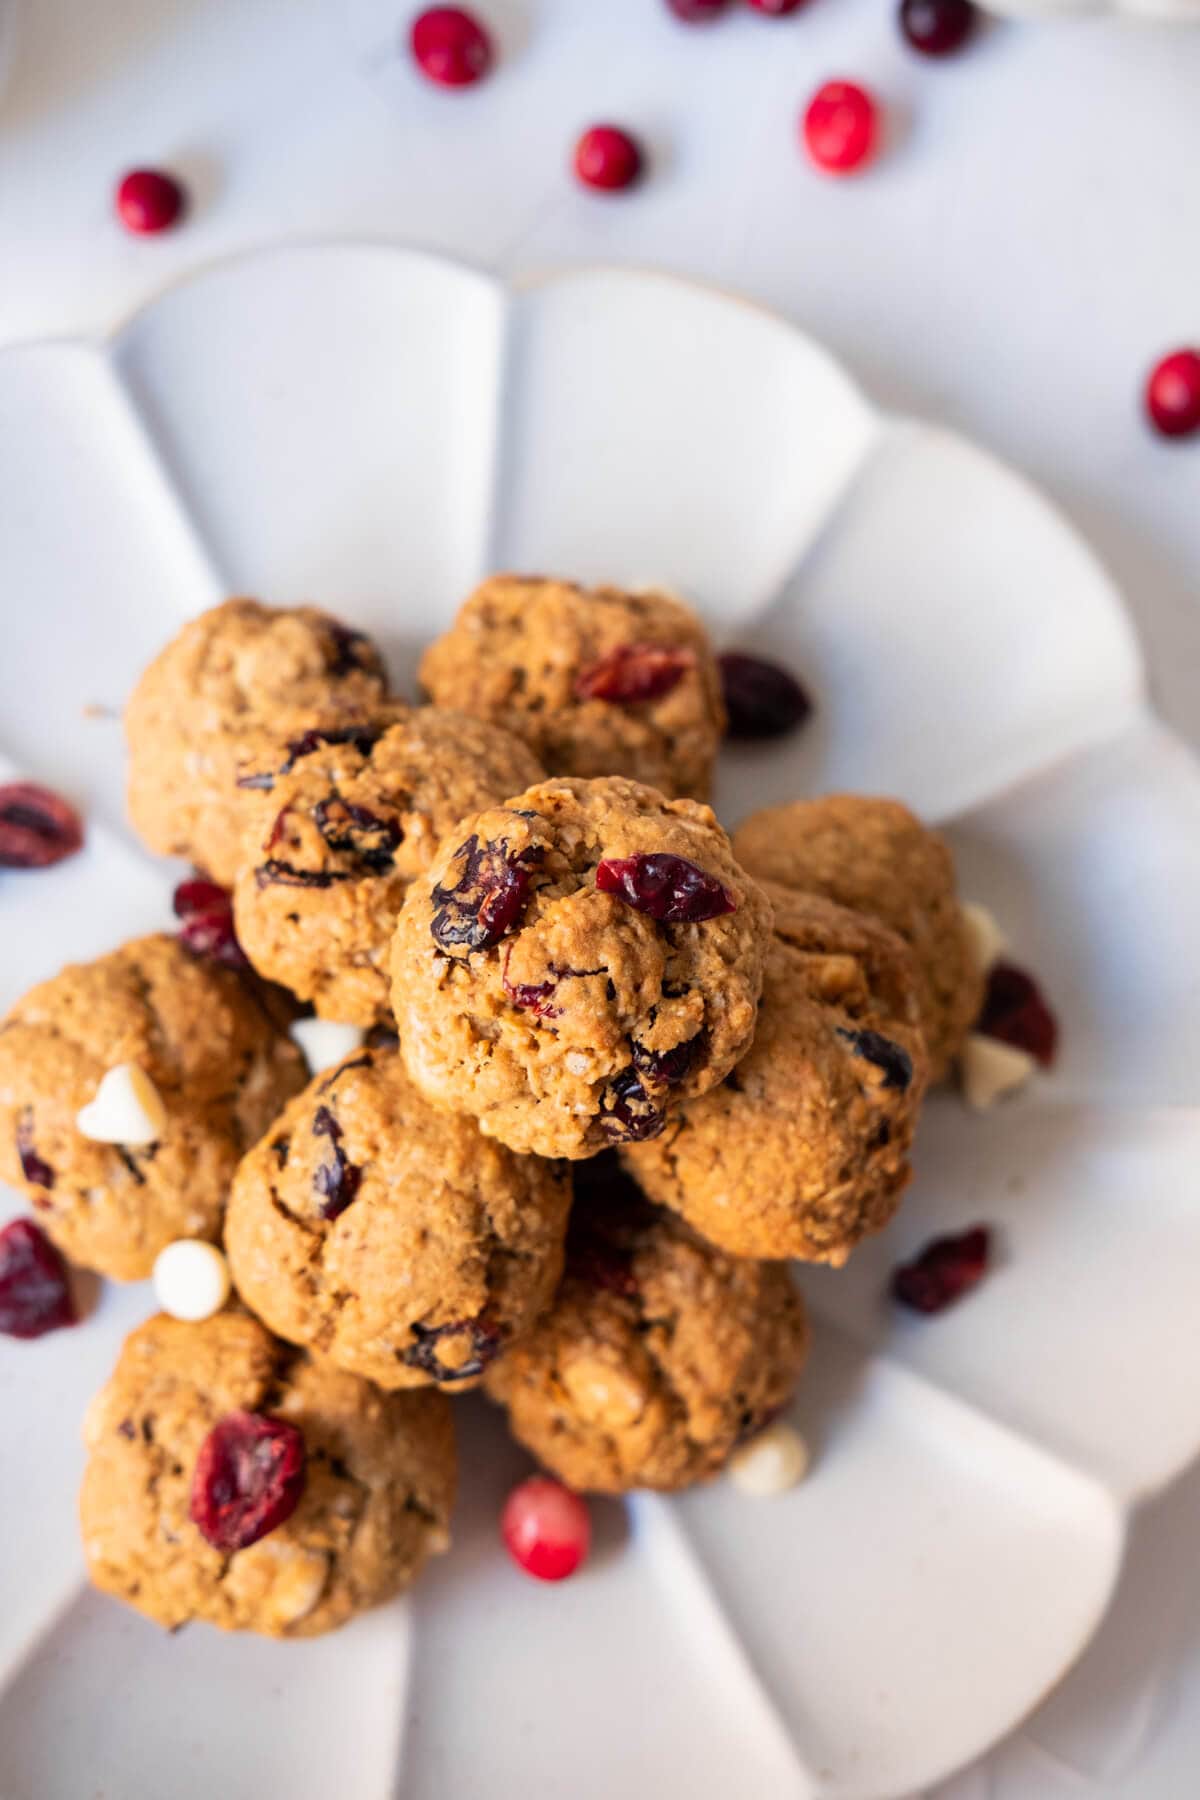 Crispy oatmeal chocolate cranberry cookies on a white plate with fresh cranberries on the side.